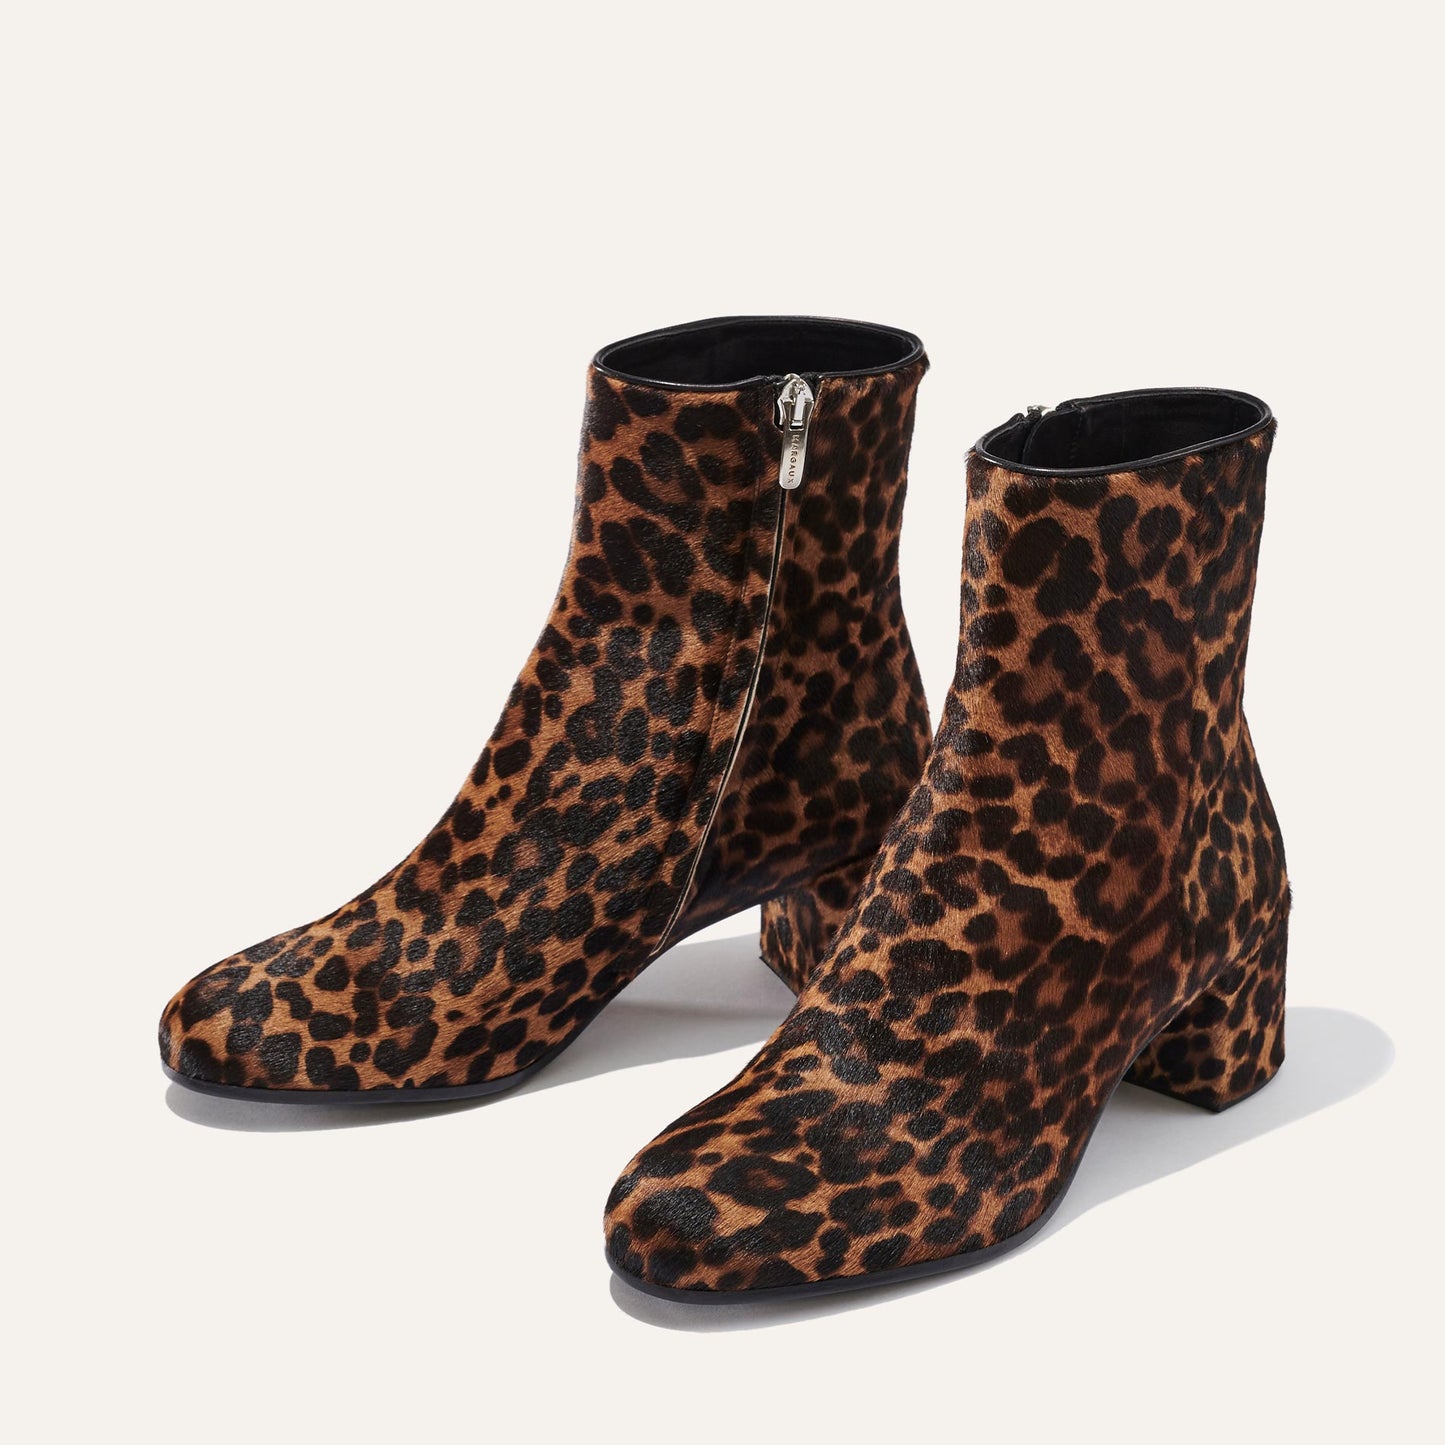 The Boot - Chocolate Leopard Haircalf